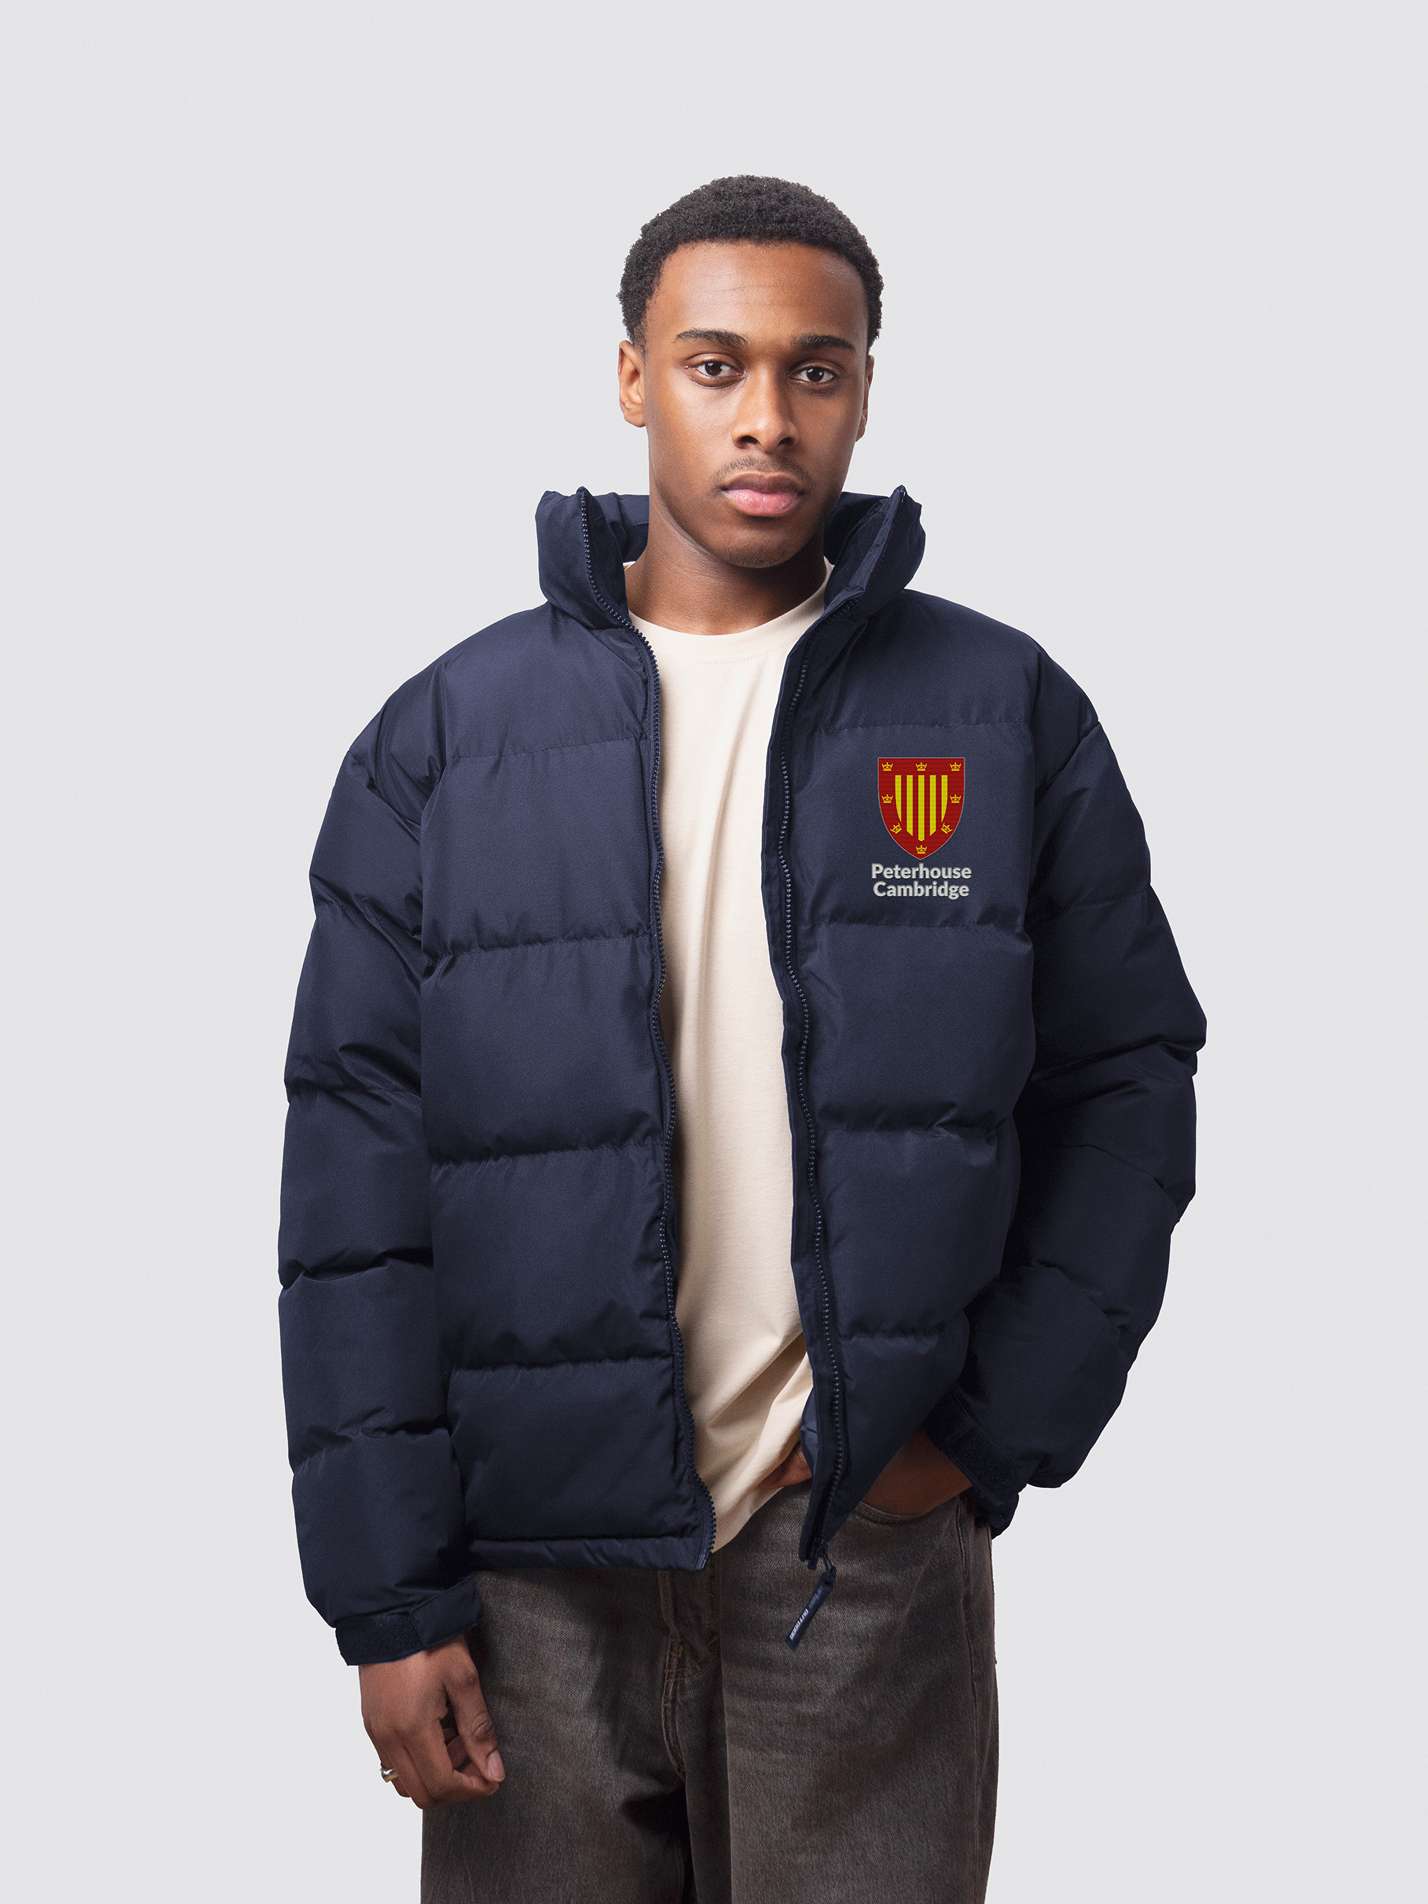 Navy Cambridge University puffer jacket, with embroidery on the left chest